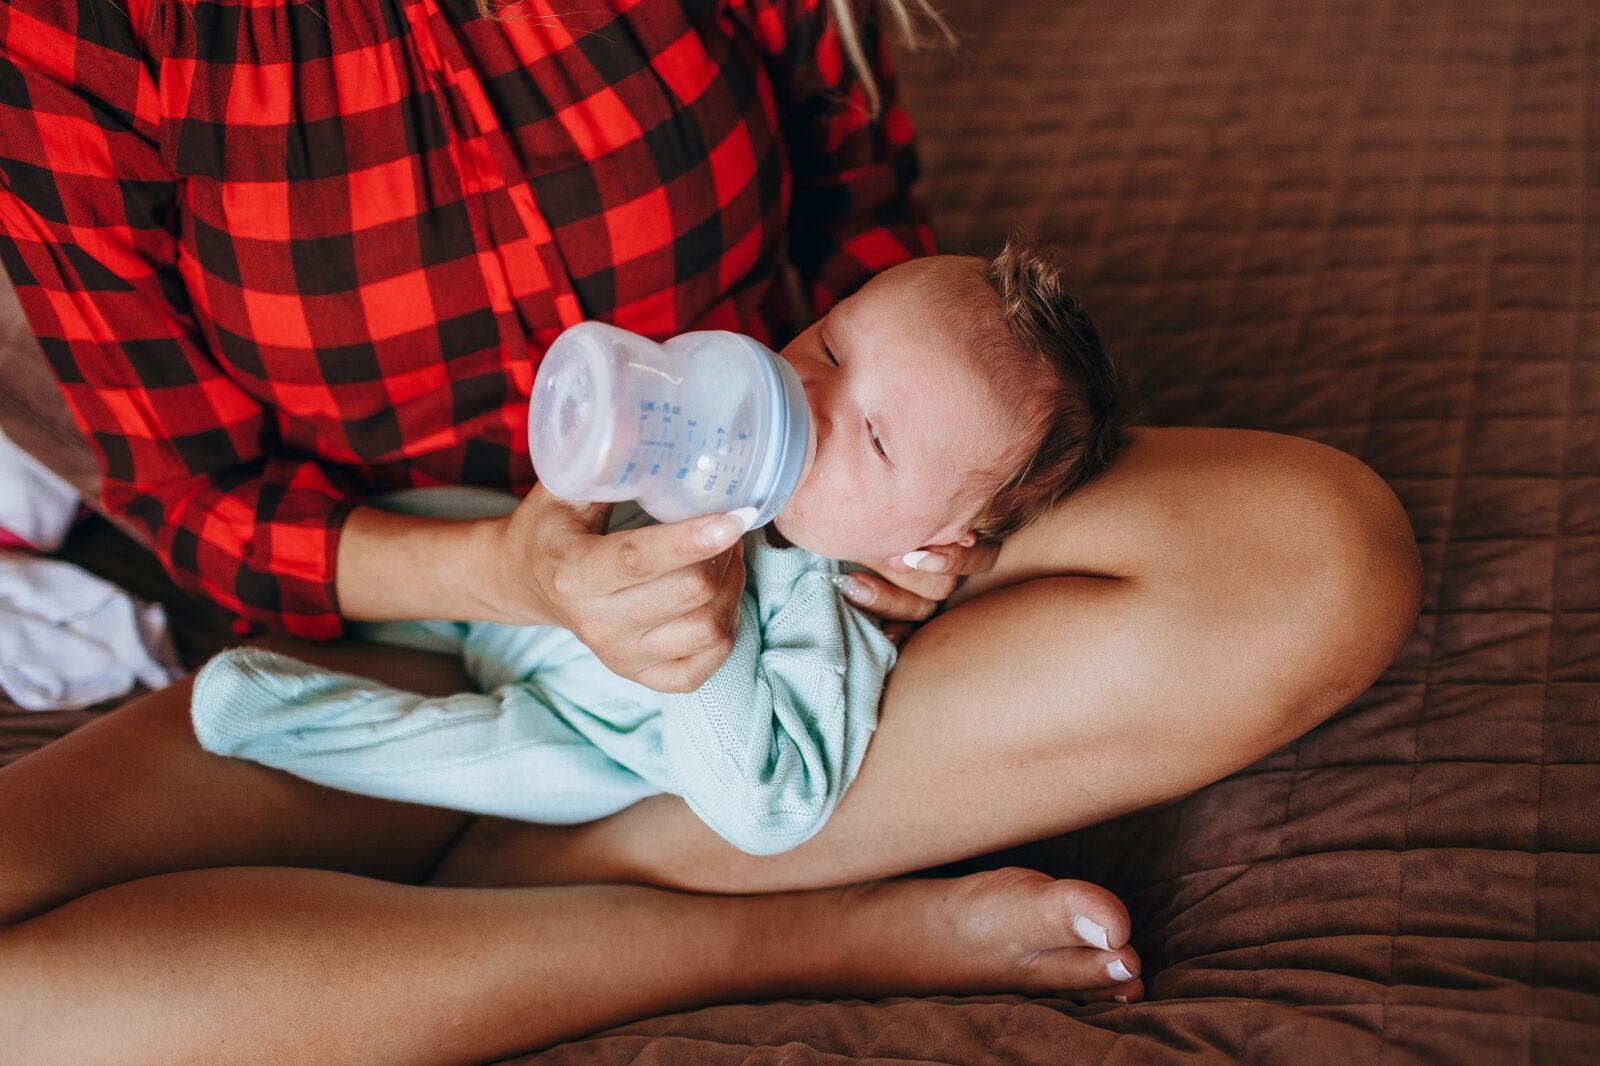 You might not remember this, but you already mastered intuitive eating in the past. As an infant, you have used your instinctive hunger and fullness cues while being fed. Image: Unsplash